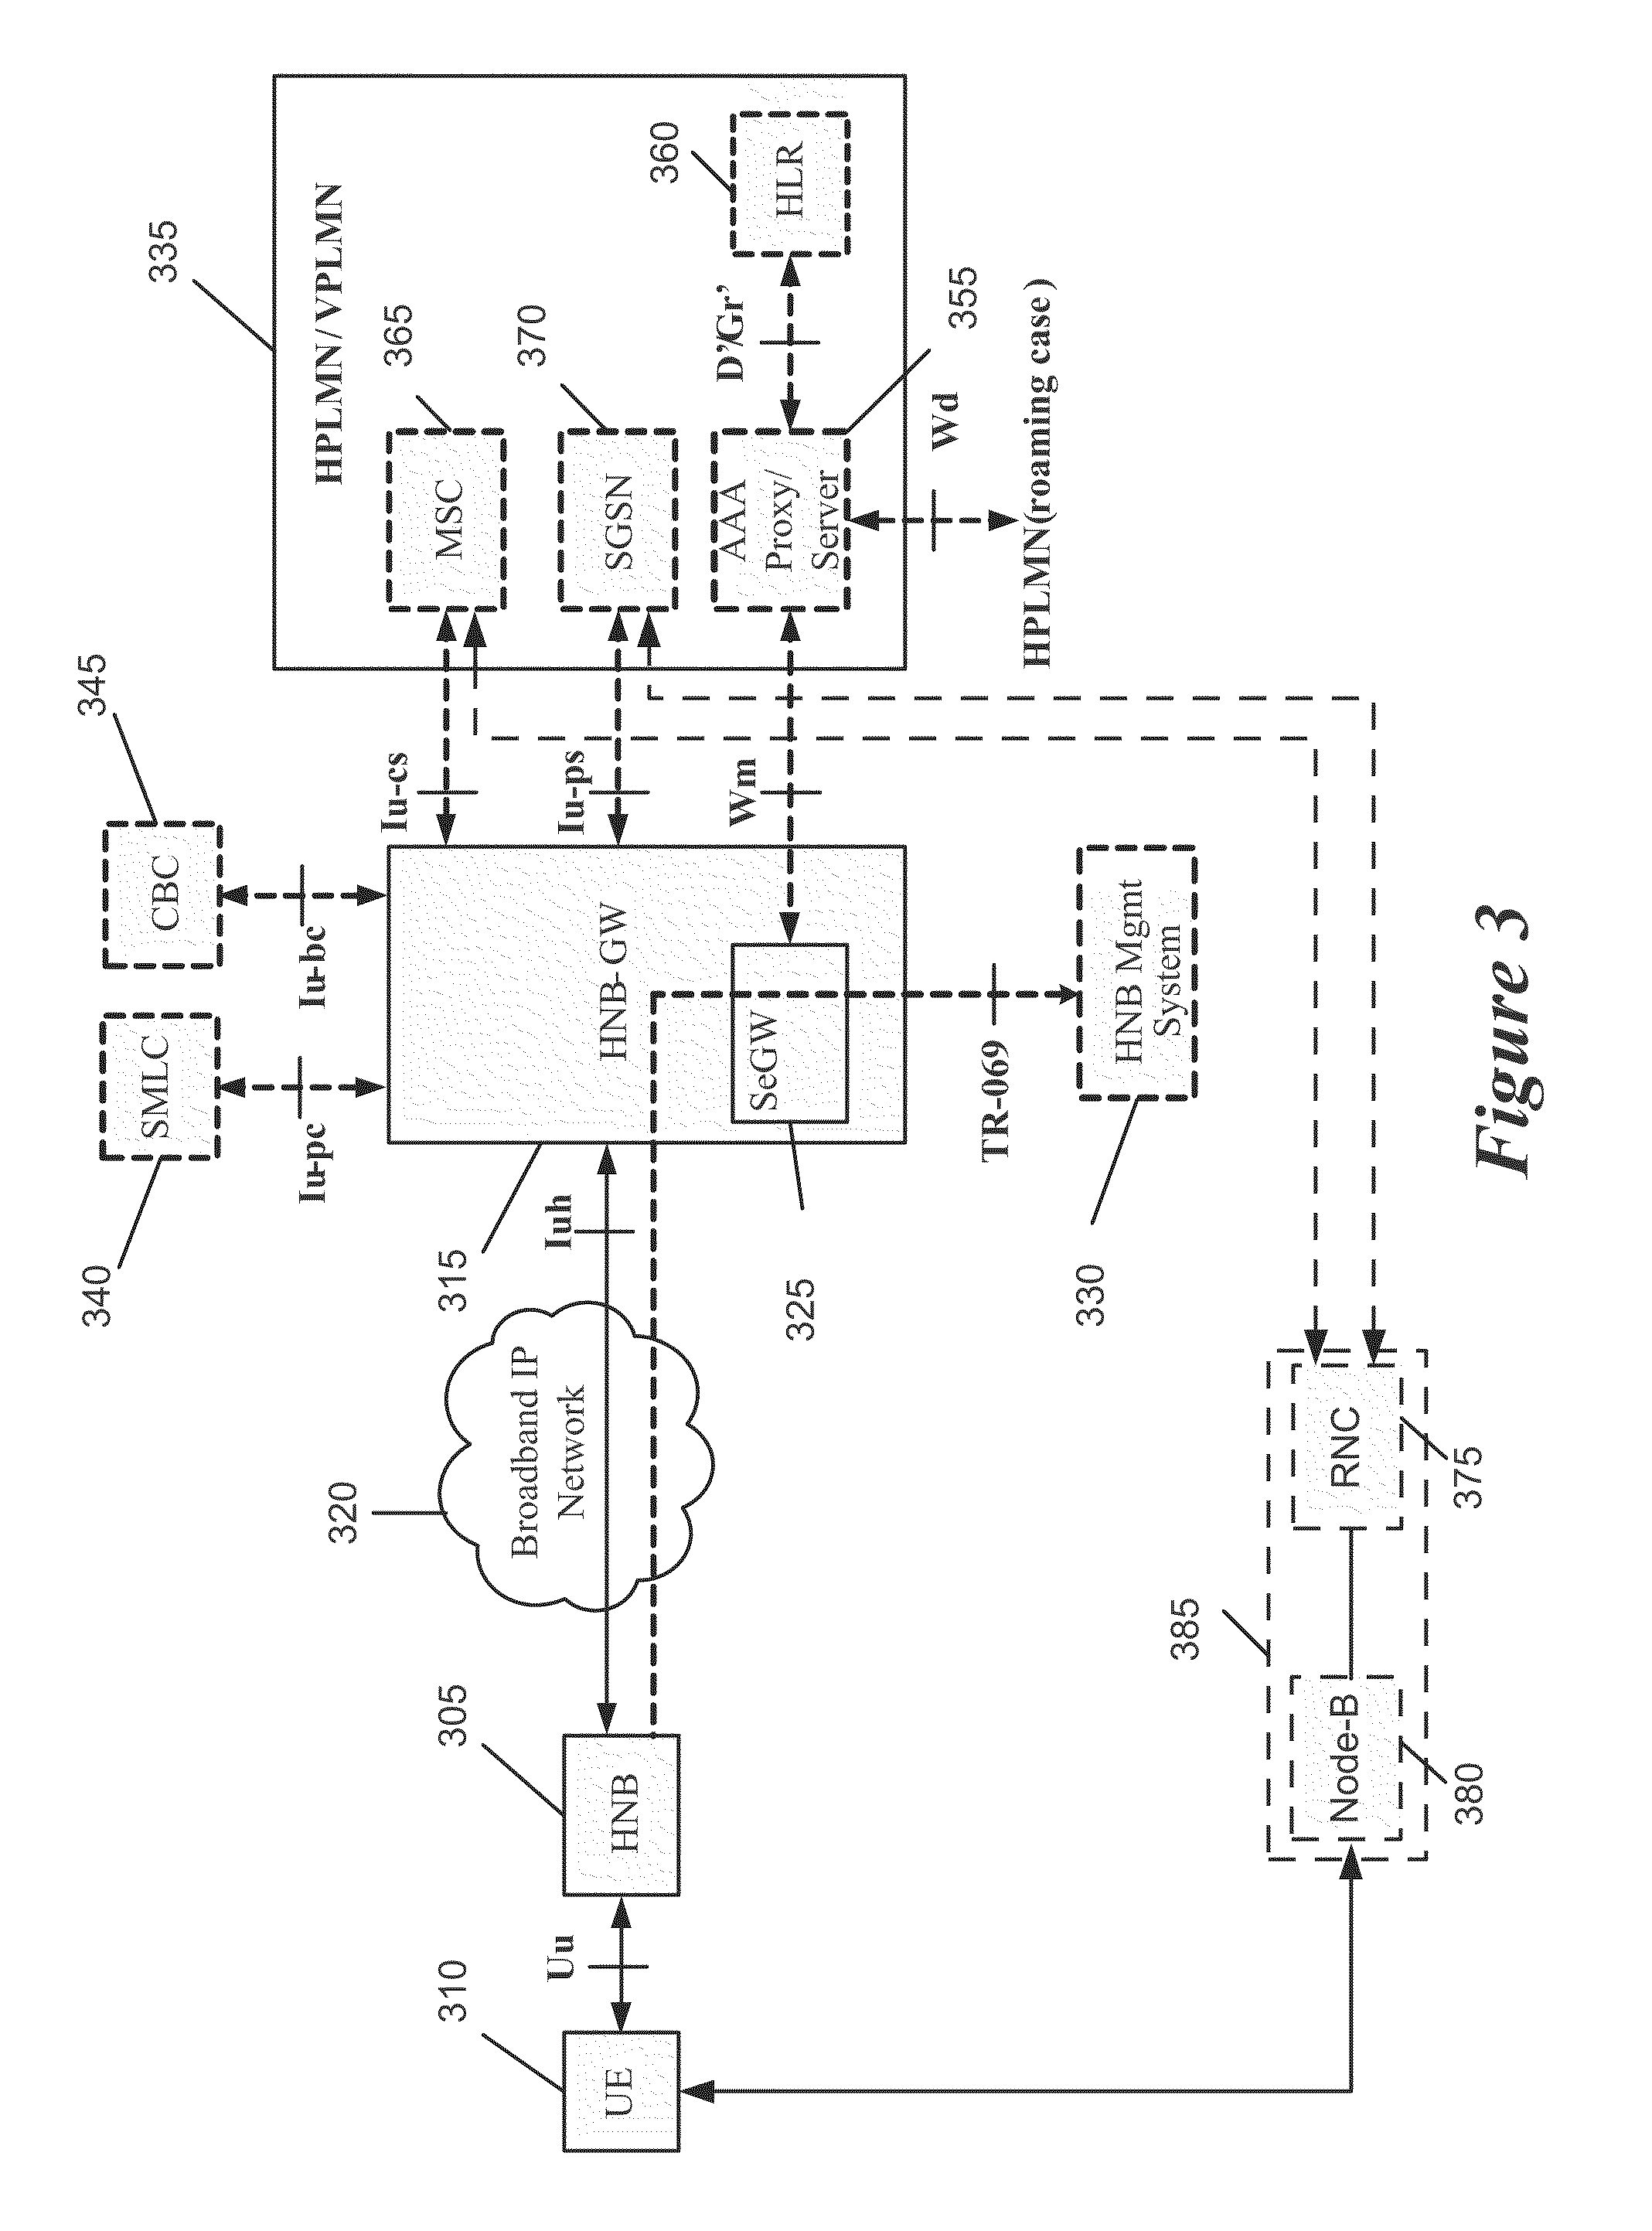 Method and Apparatus for Establishment of Asynchronous Transfer Mode Based Bearer Connection between a Network Controller and Core Network